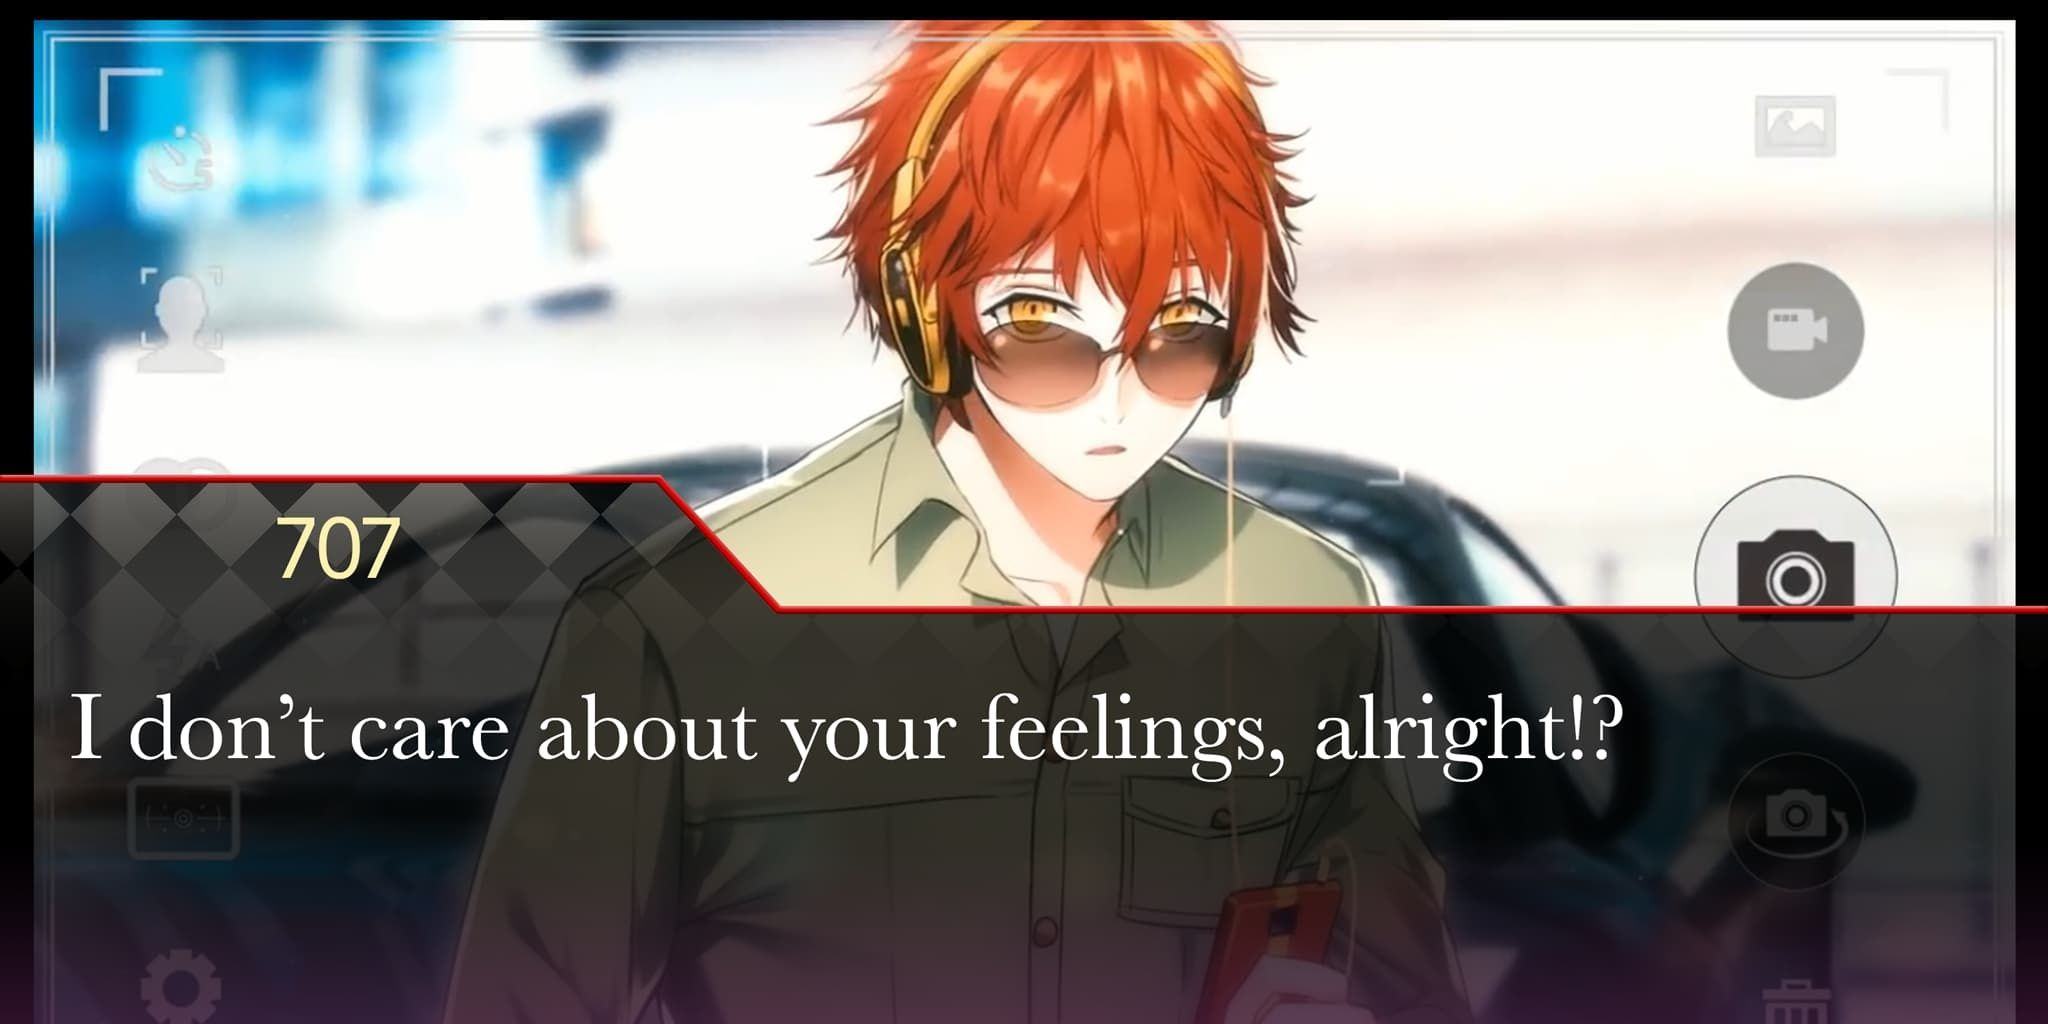 Screenshot form the dating sim Mystic Messenger of ginger character overlaid with text